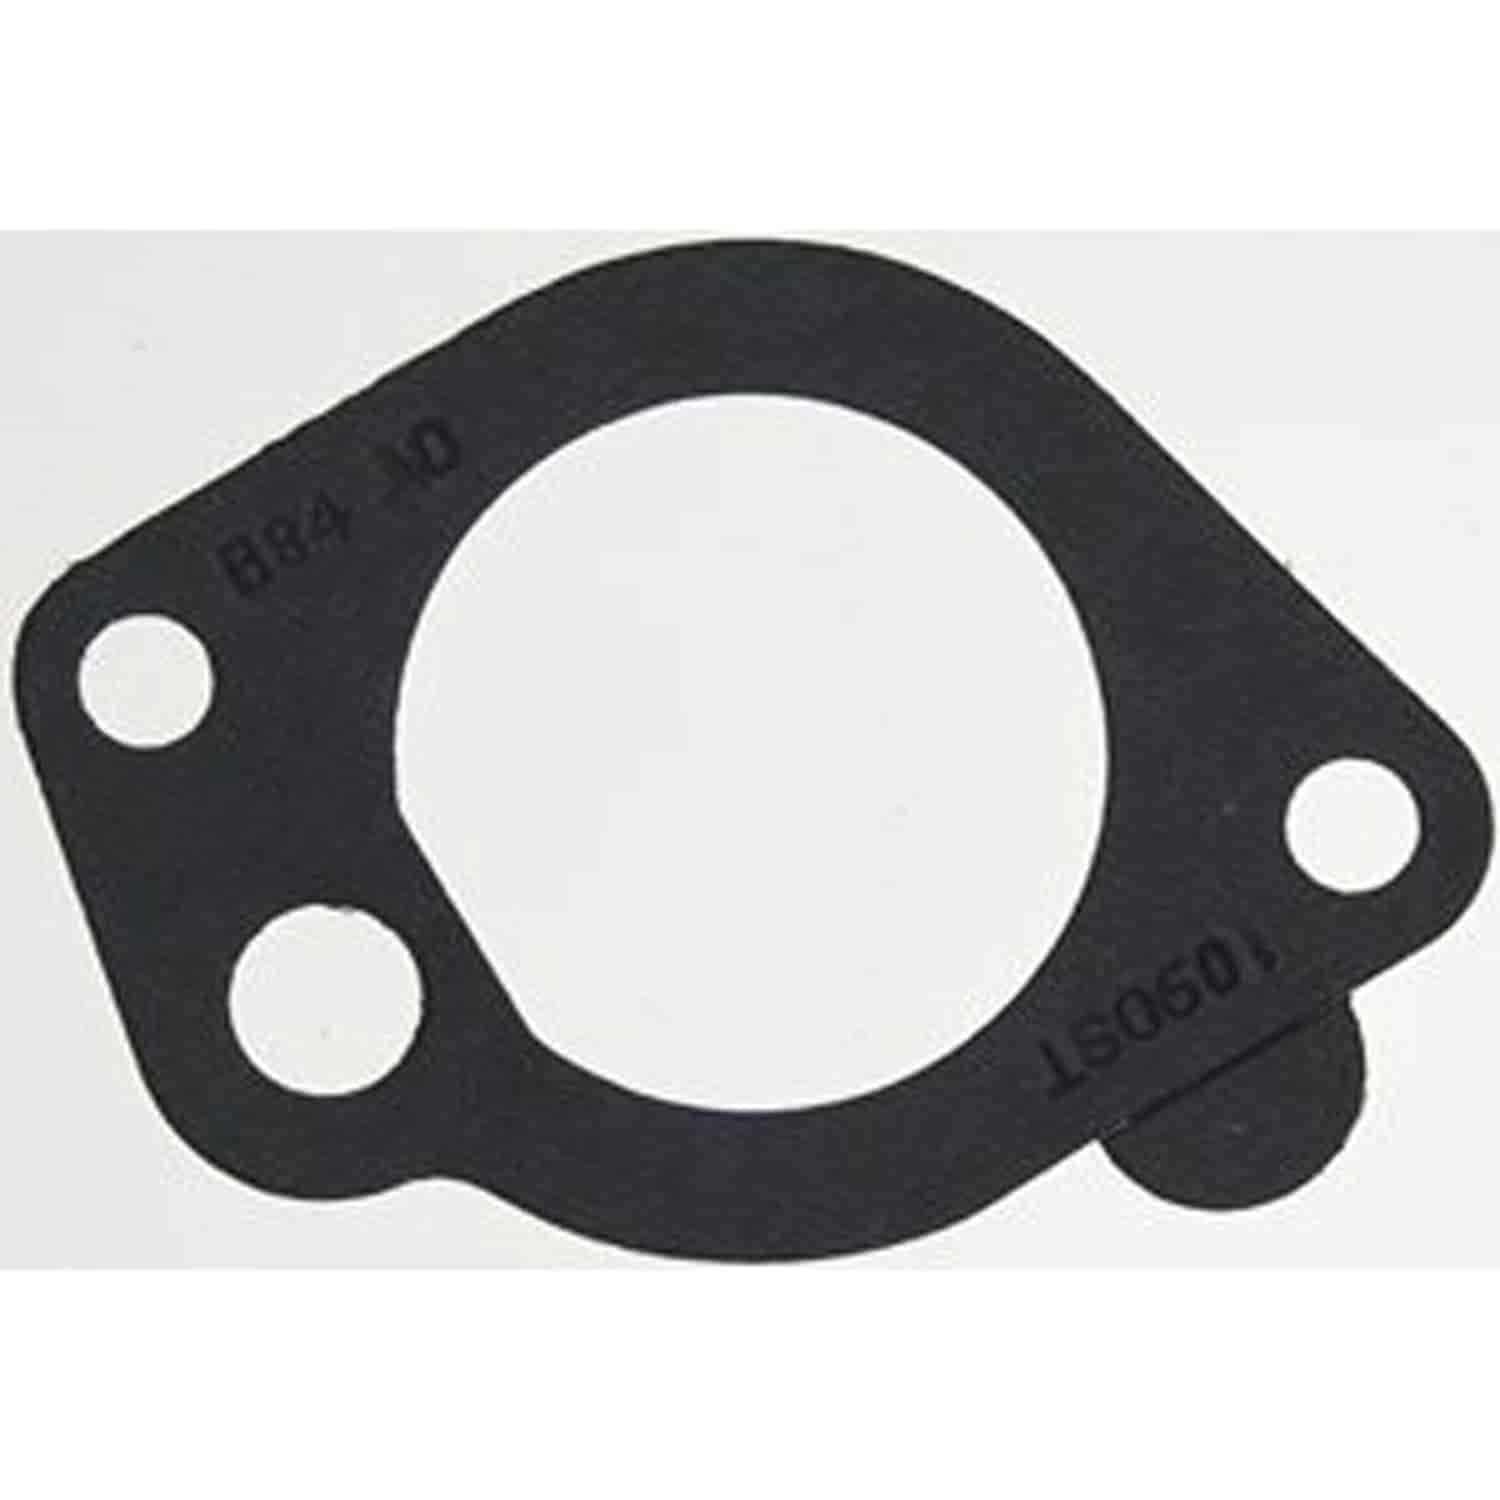 Thermostat Gaskets 1.9